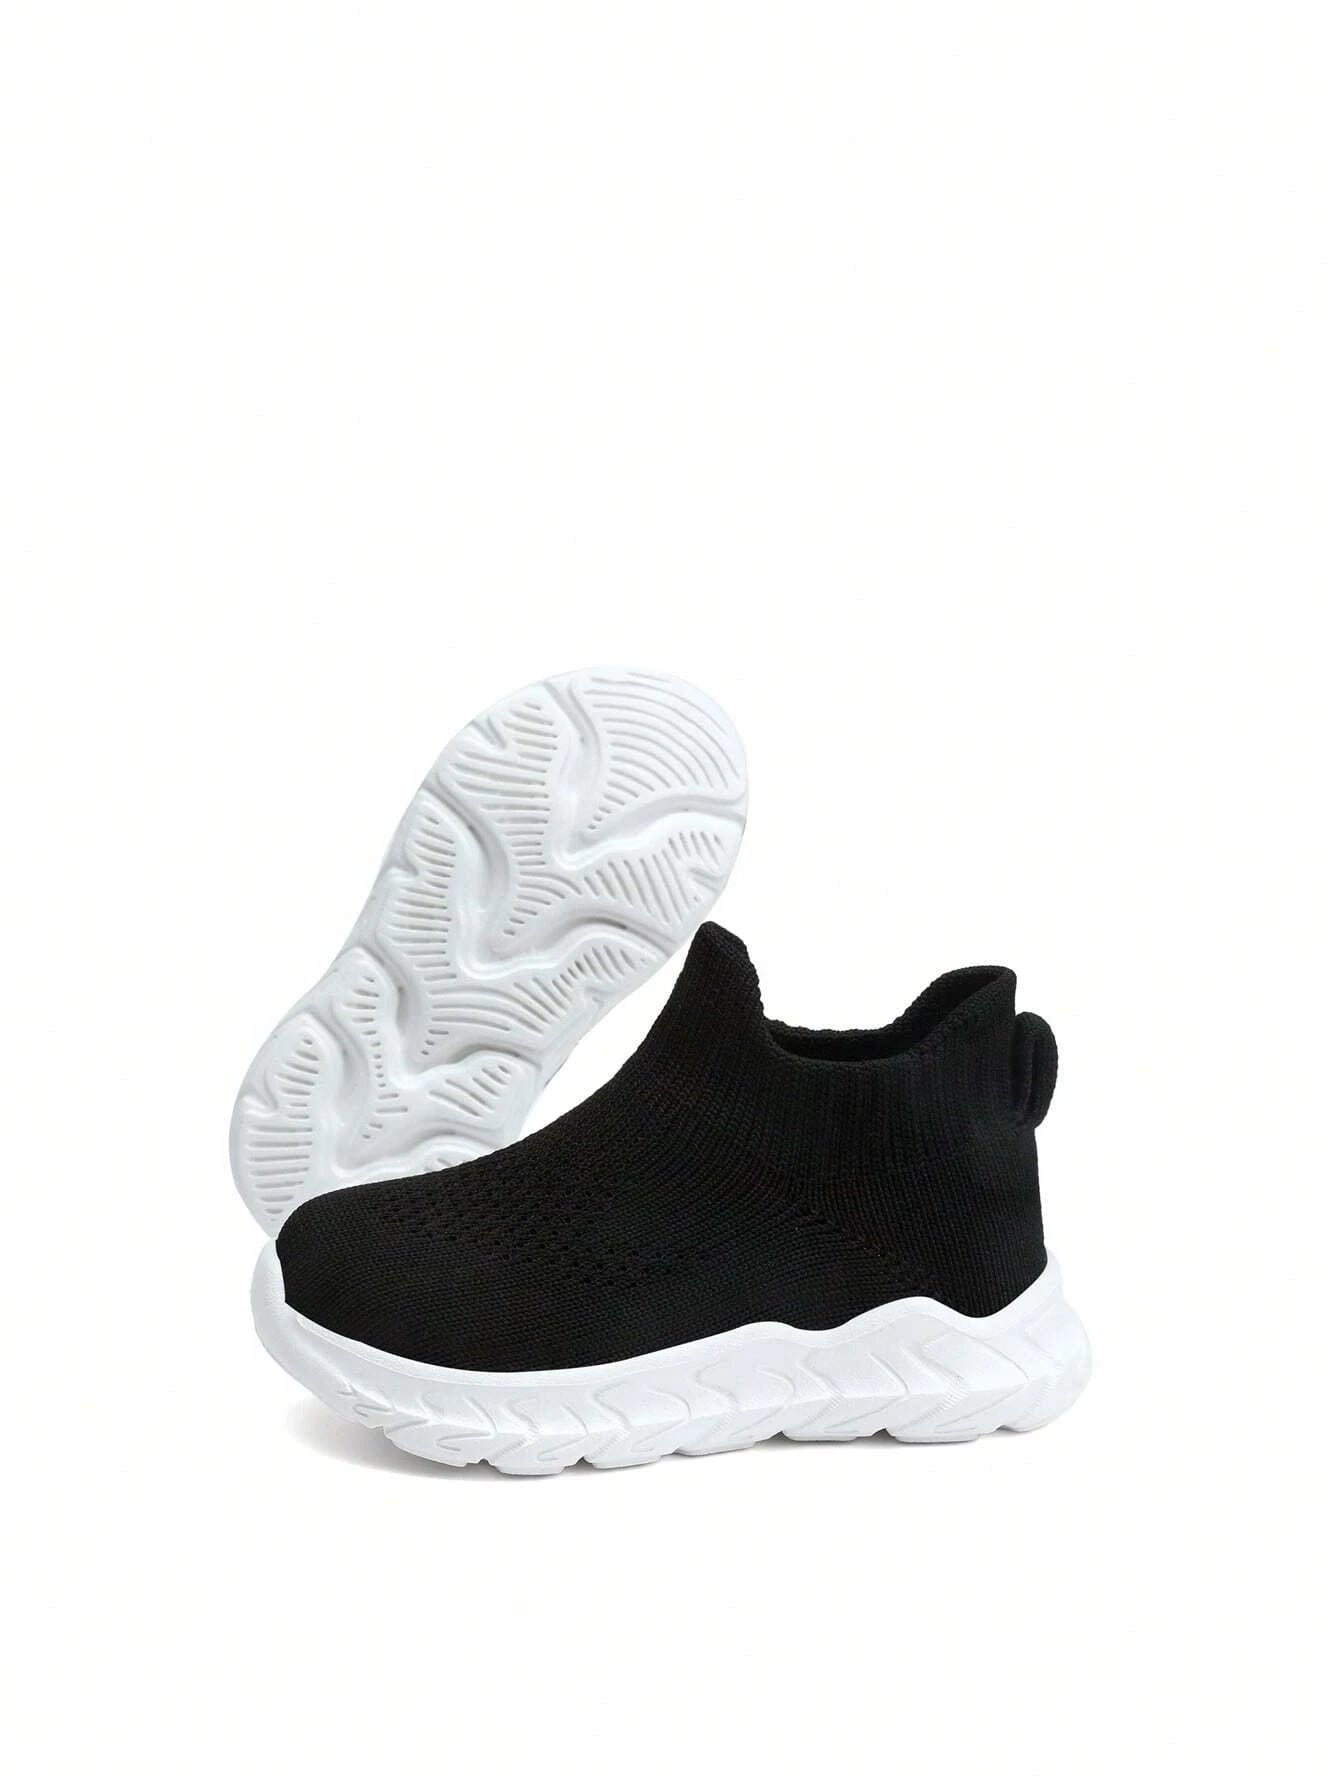 Baby Boys Knit Detail Breathable Sporty Slip On Sneakers Outdoor